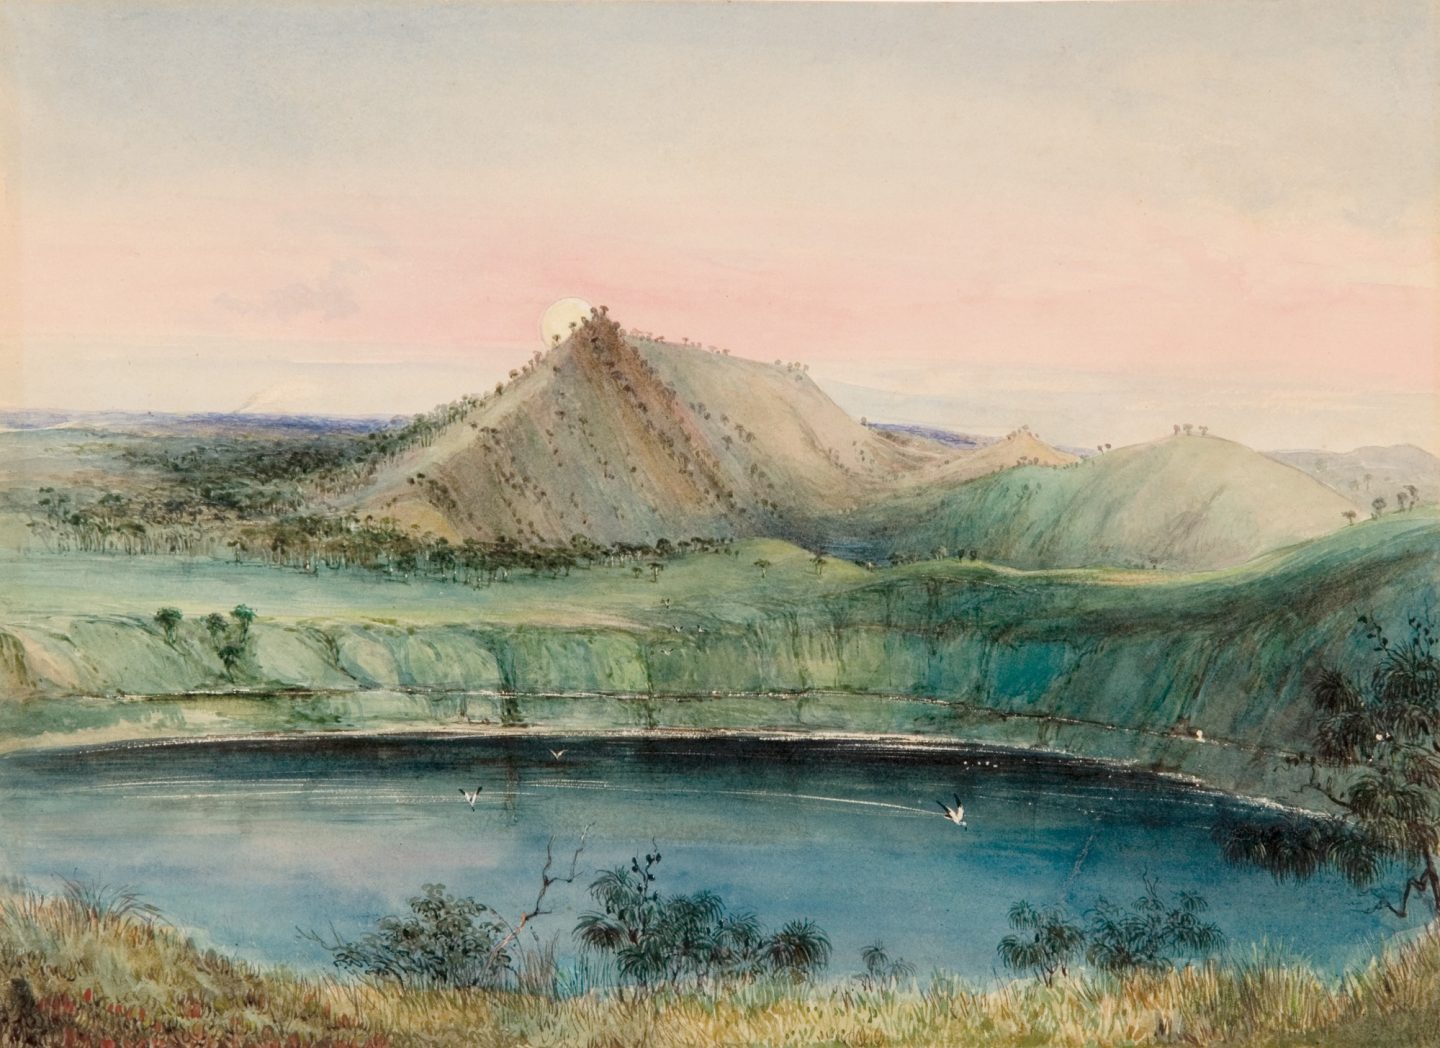 George French Angas, Australia, 1822 – 1886, Blue Lake, Mount Gambier, 1844, Adelaide, watercolour on paper; Gift of Douglas and Barbara Mullins through the Art Gallery of South Australia Foundation to commemorate the Gallery’s 130th anniversary 2011. Donated through the Australian Government’s Cultural Gifts Program, Art Gallery of South Australia, Adelaide